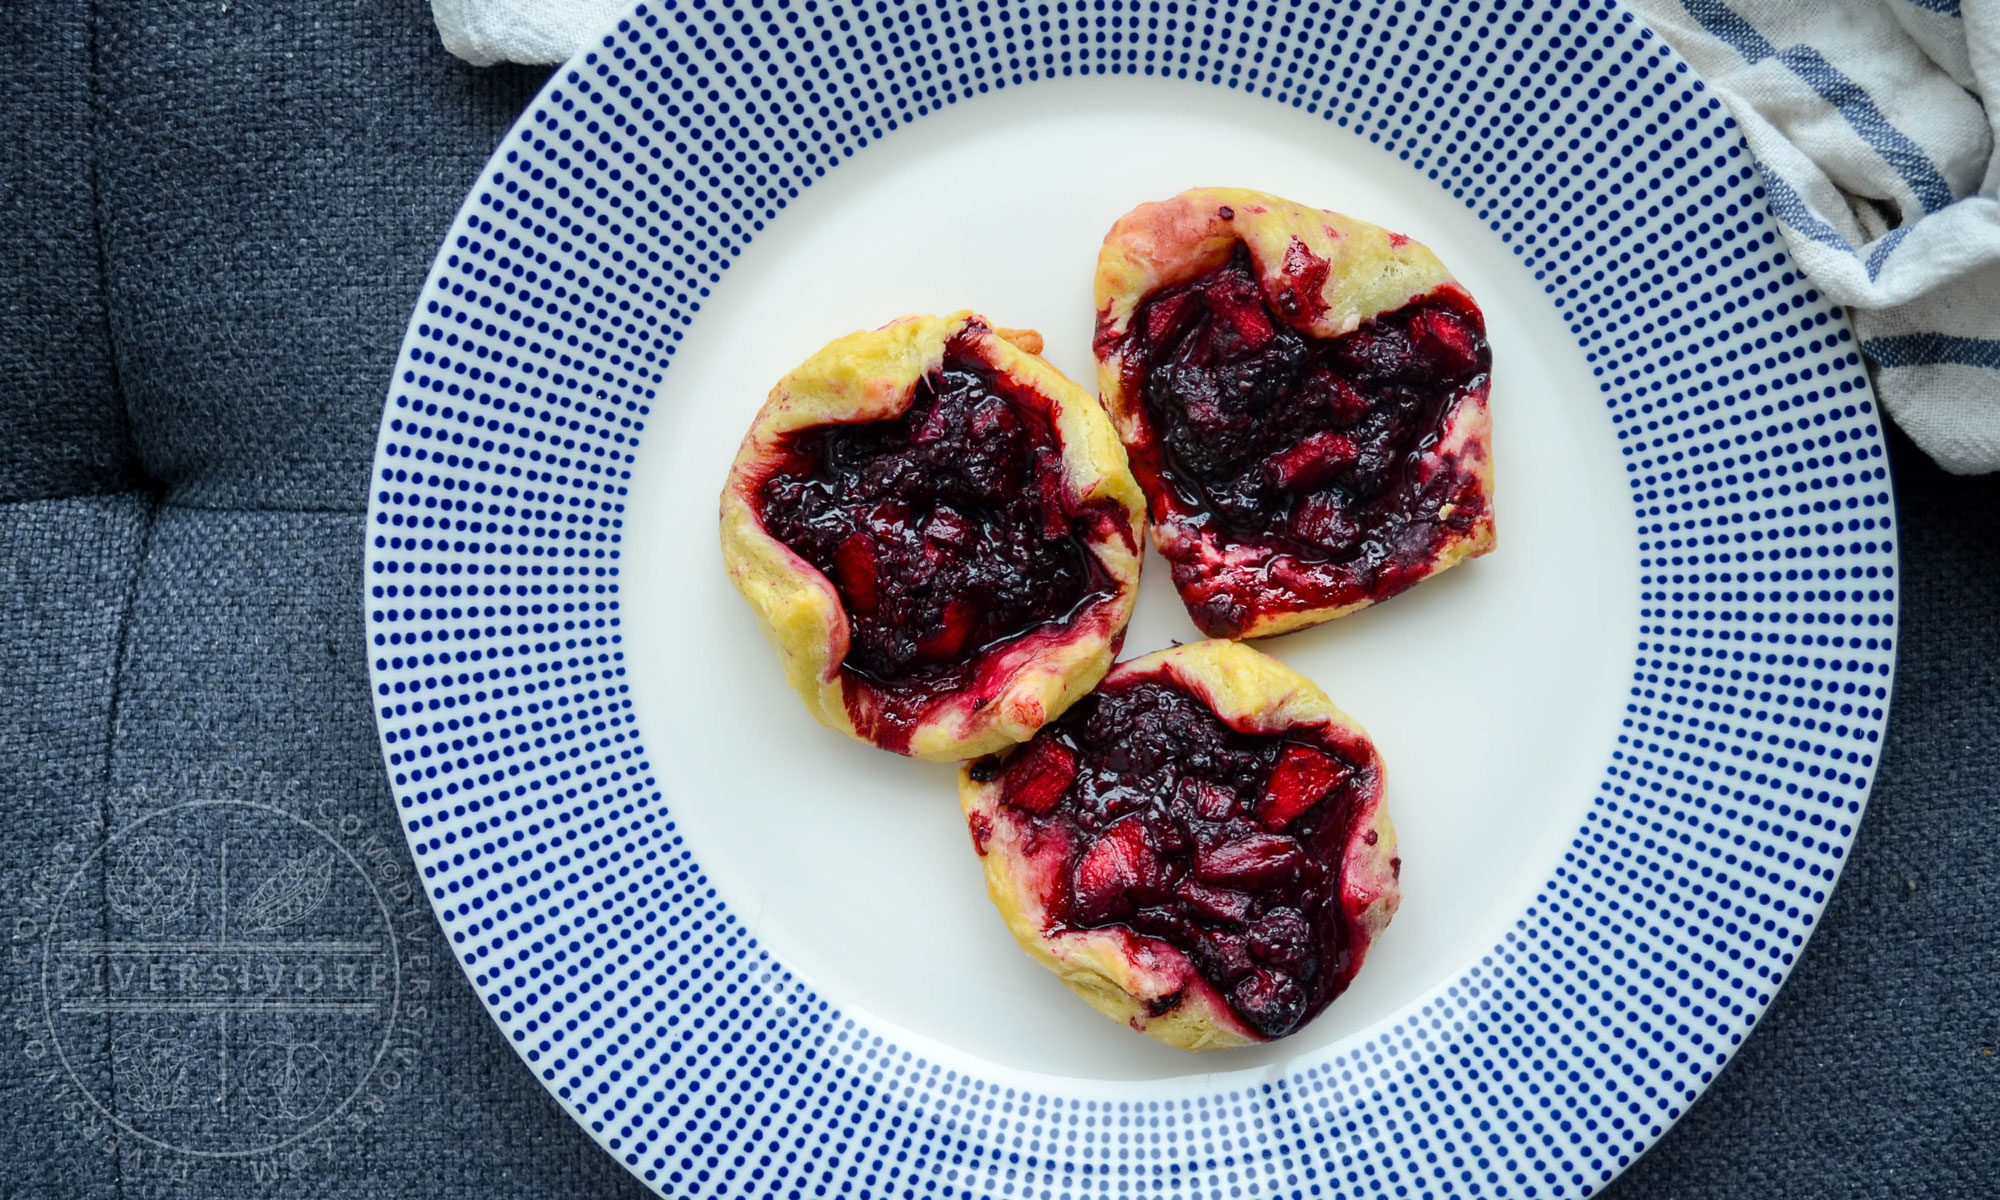 Dewberry and apple puff pastry tarts on a white plate with blue dots